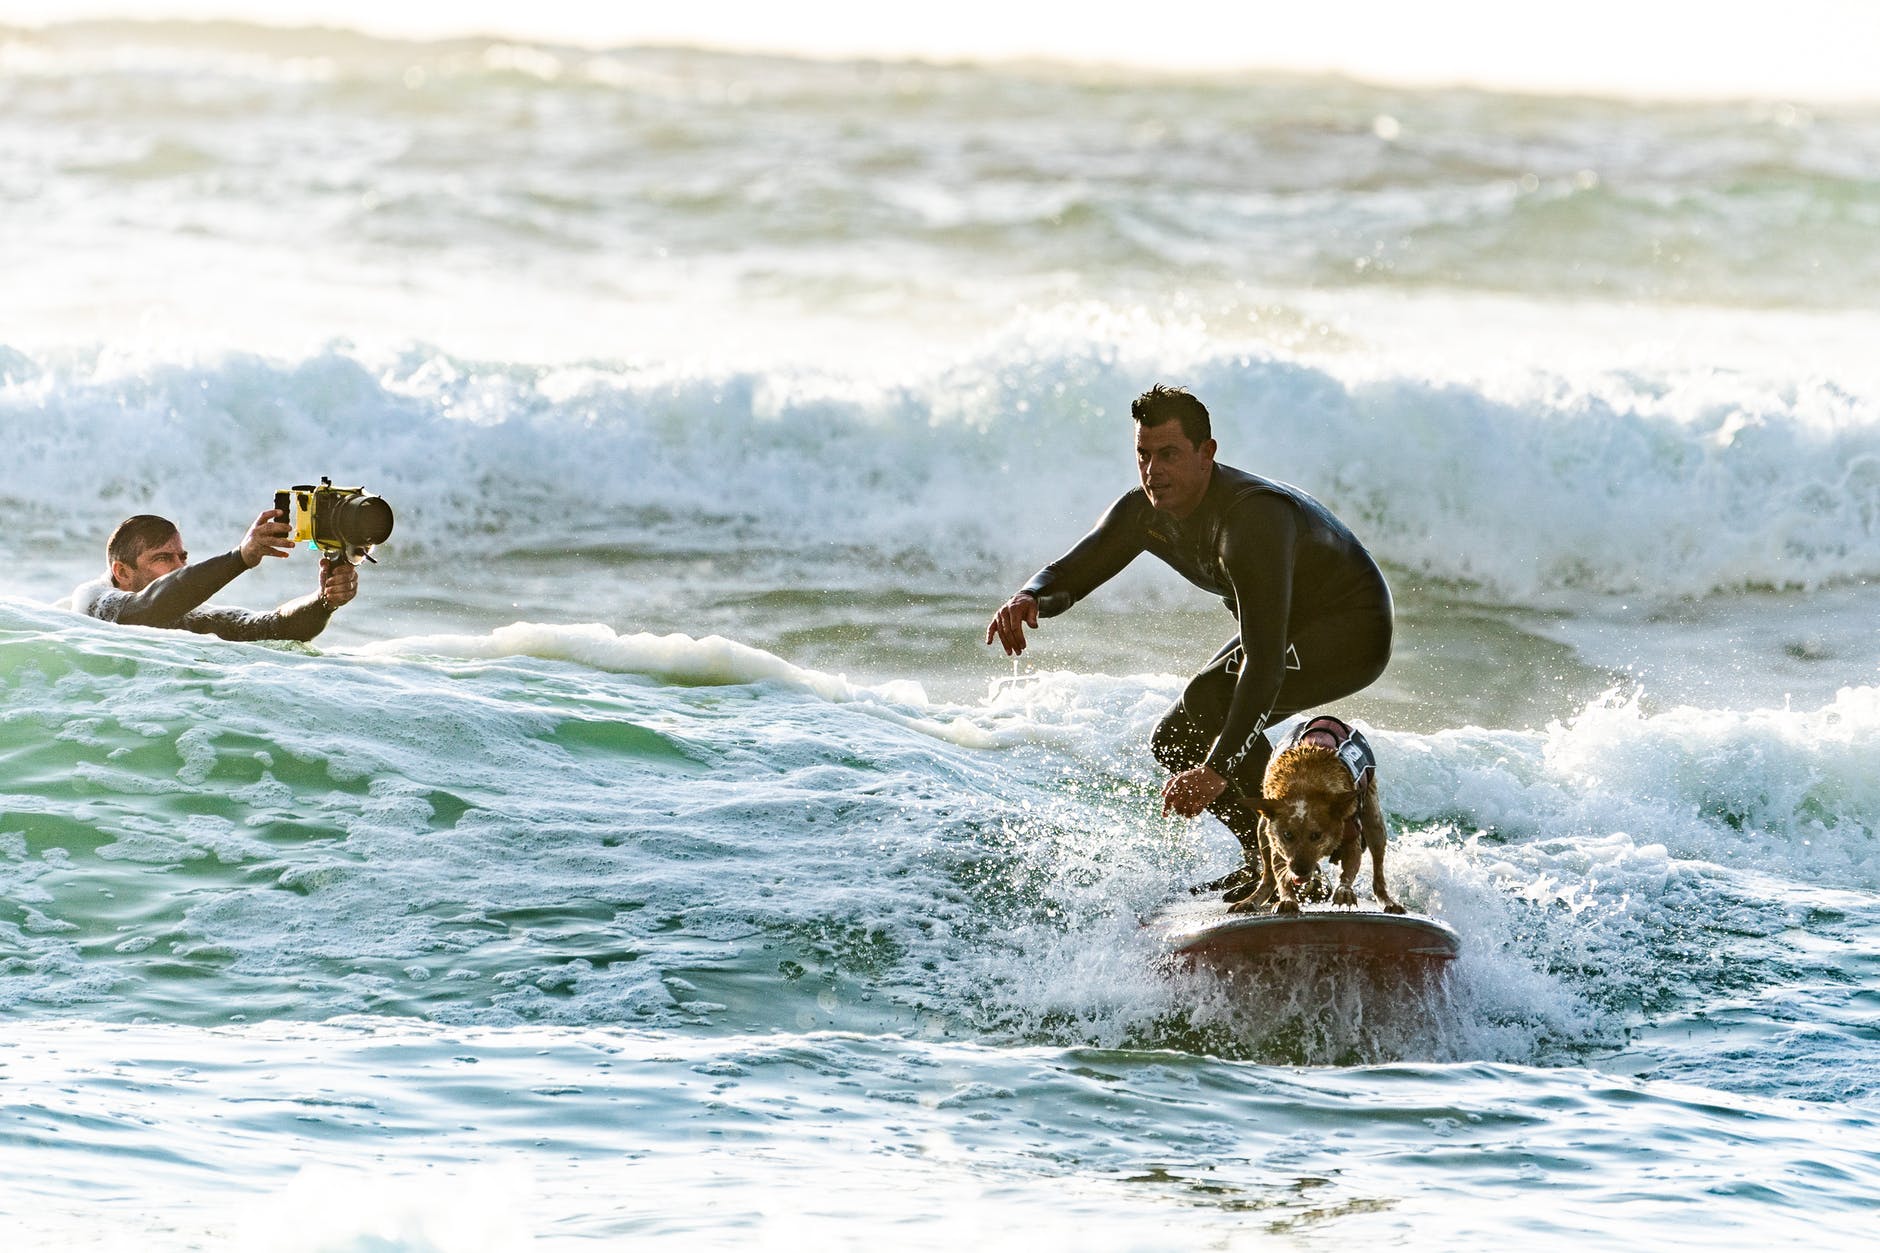 surfer surfing with his surfer dog